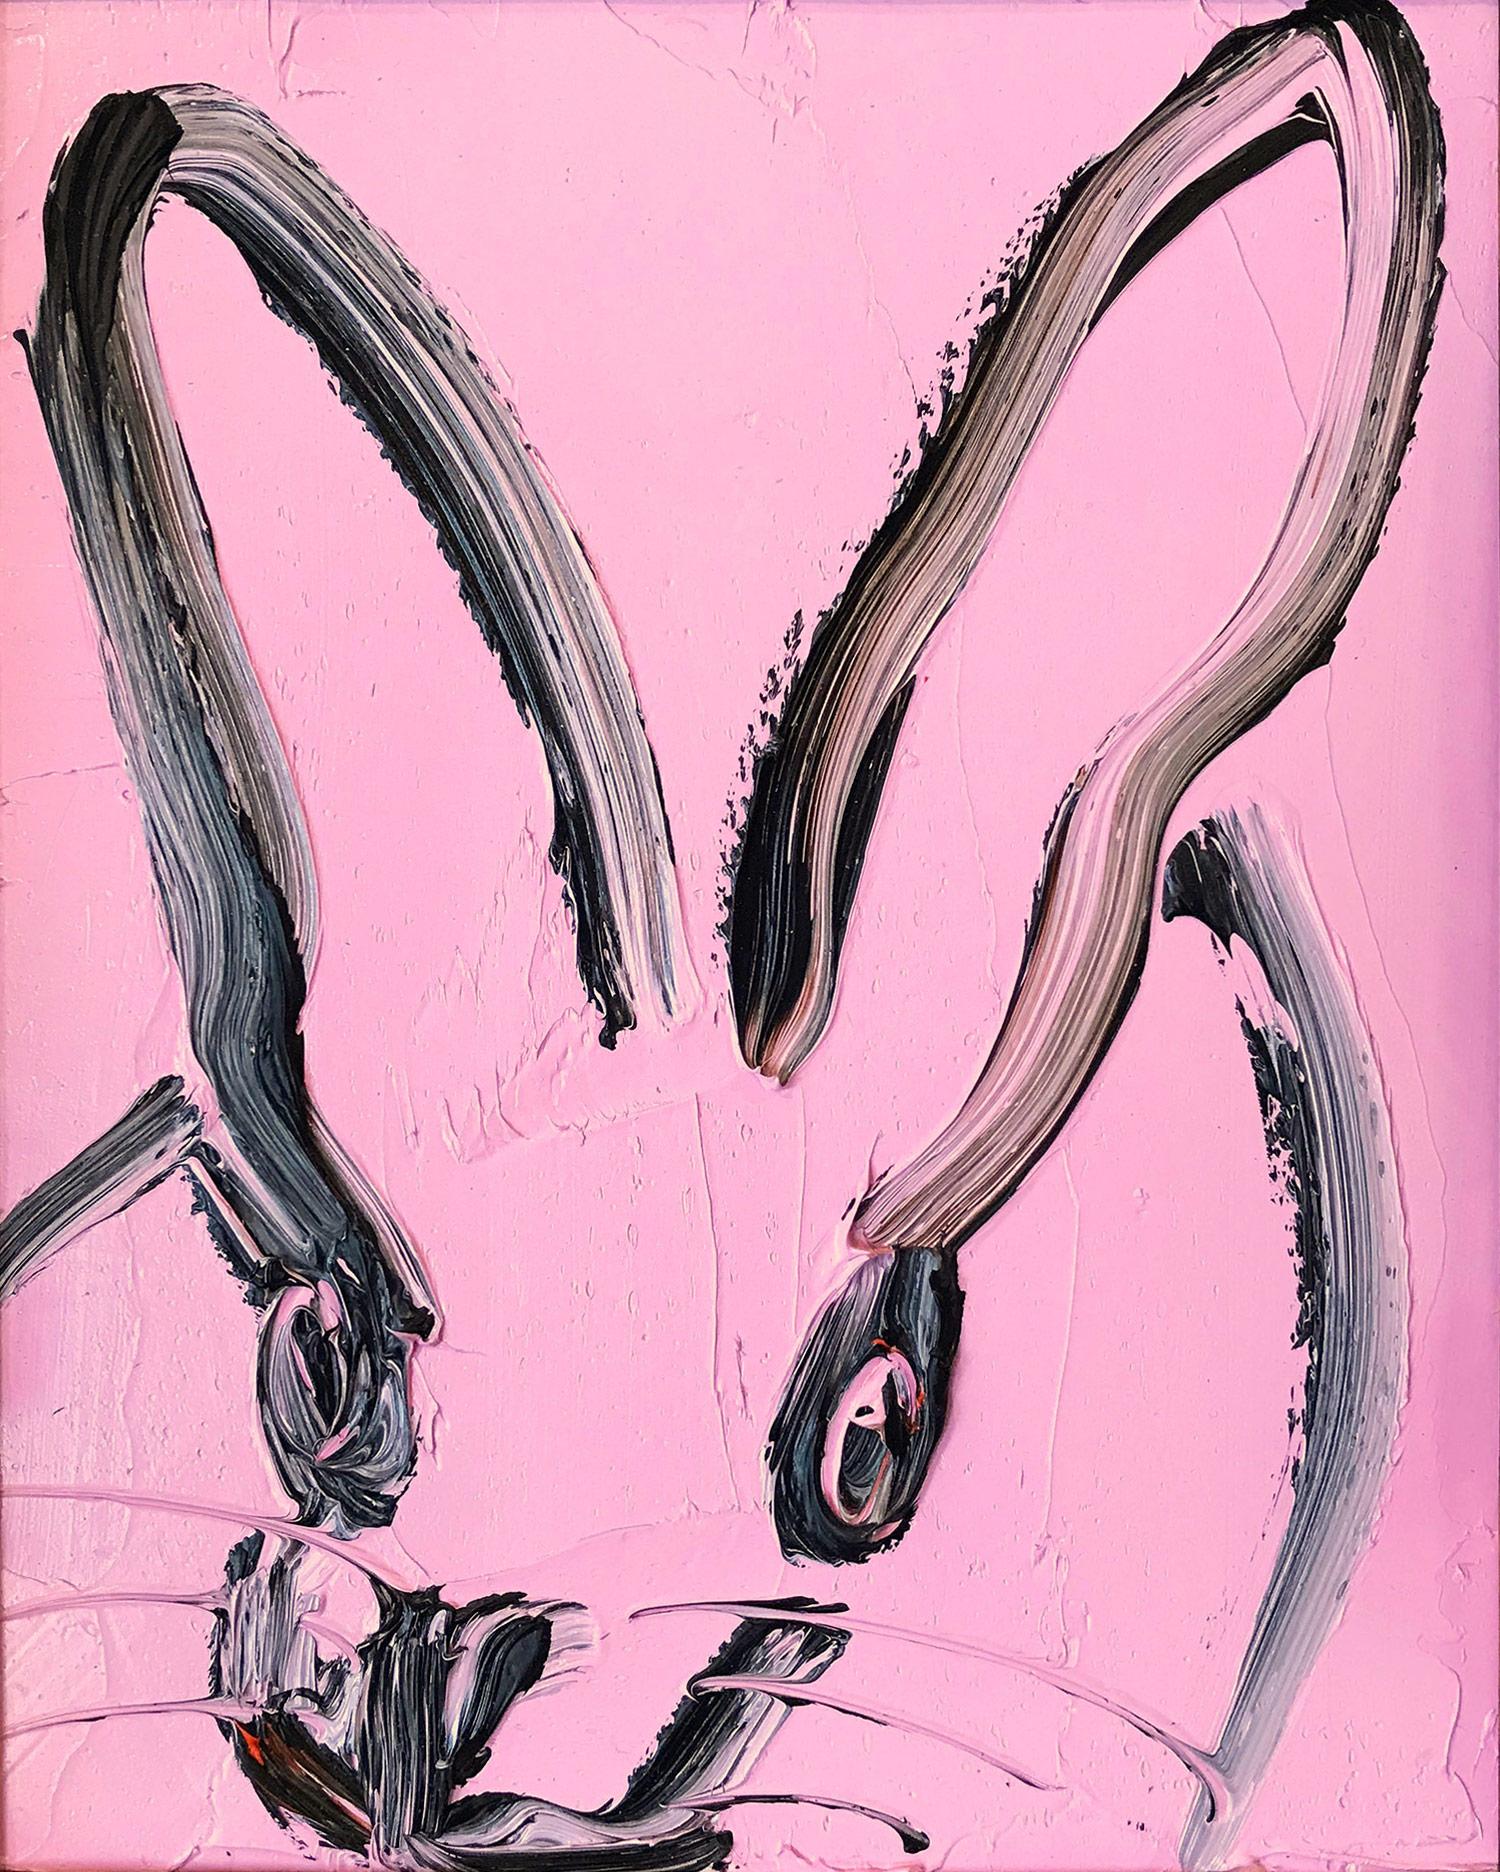 Untitled (Bunny on Pink Lavender) - Painting by Hunt Slonem